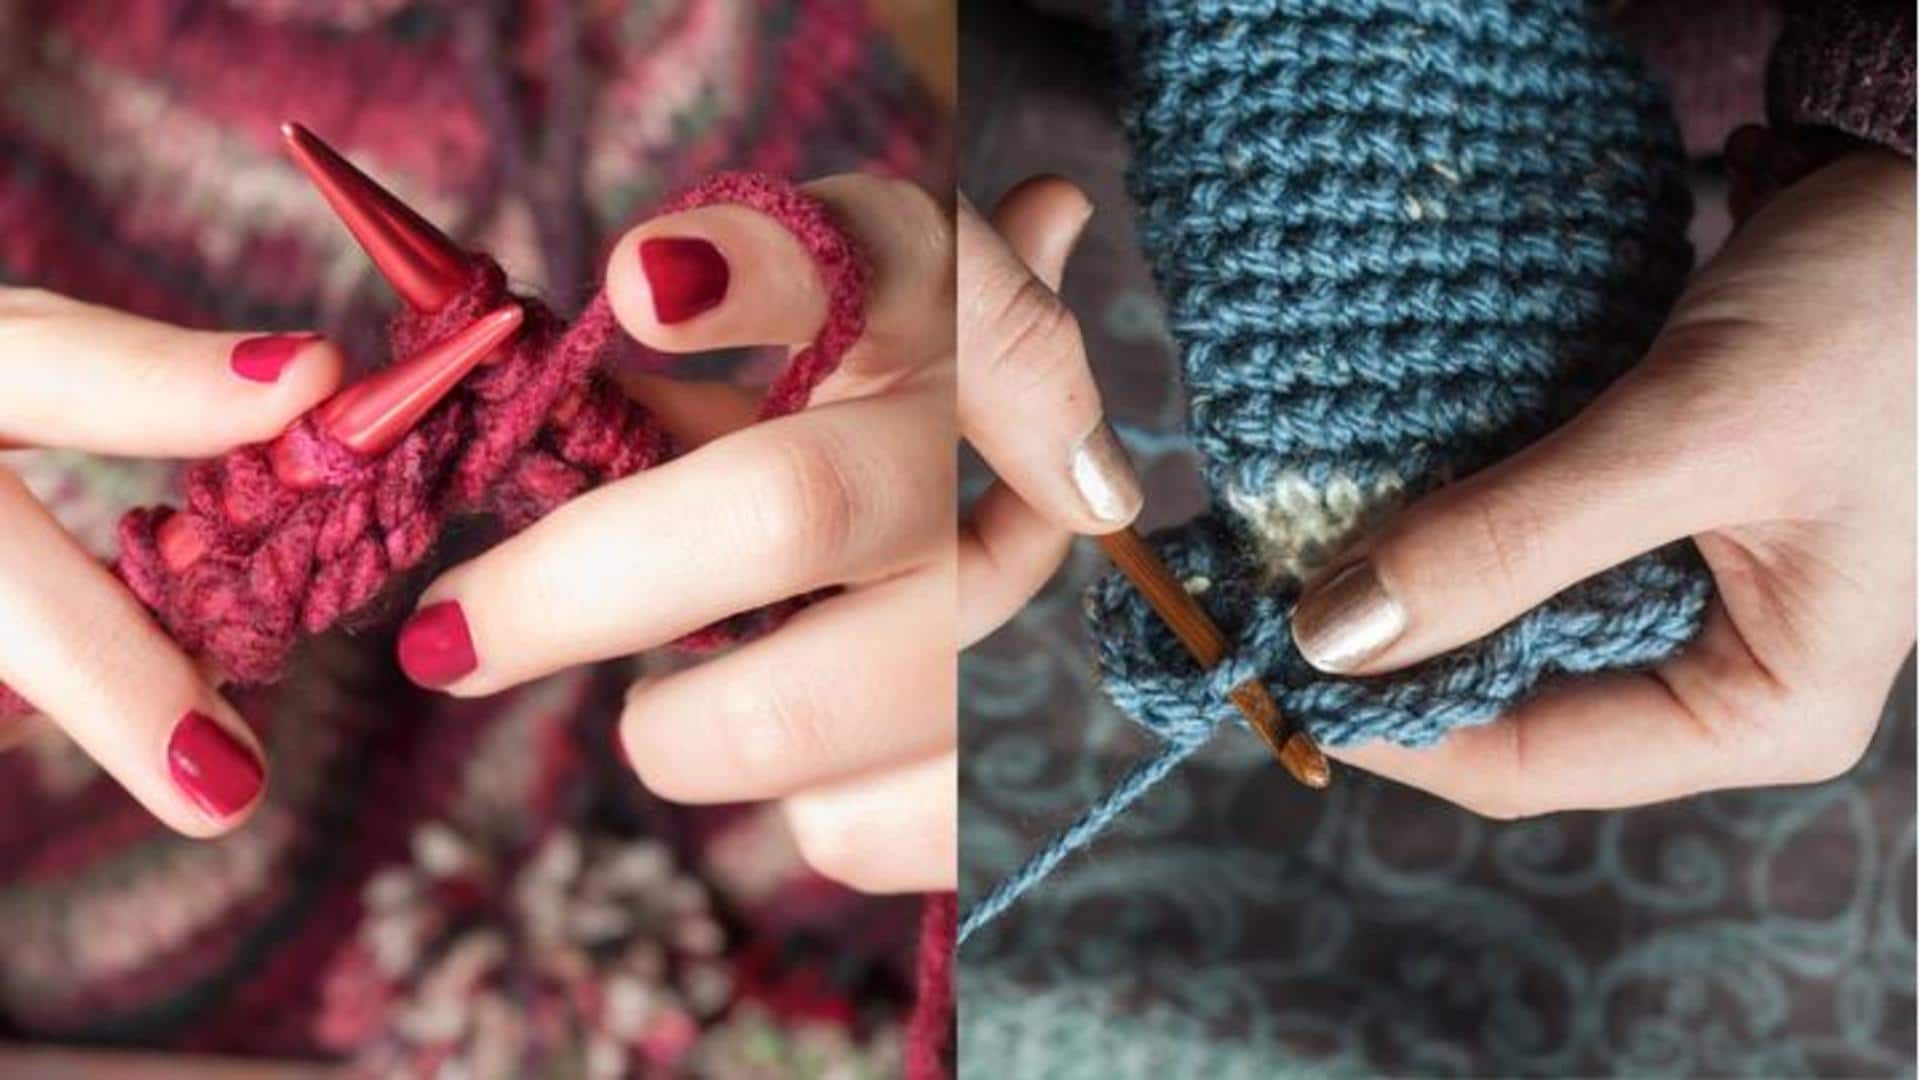 Untangling the choice: Knitting vs crocheting - know the difference